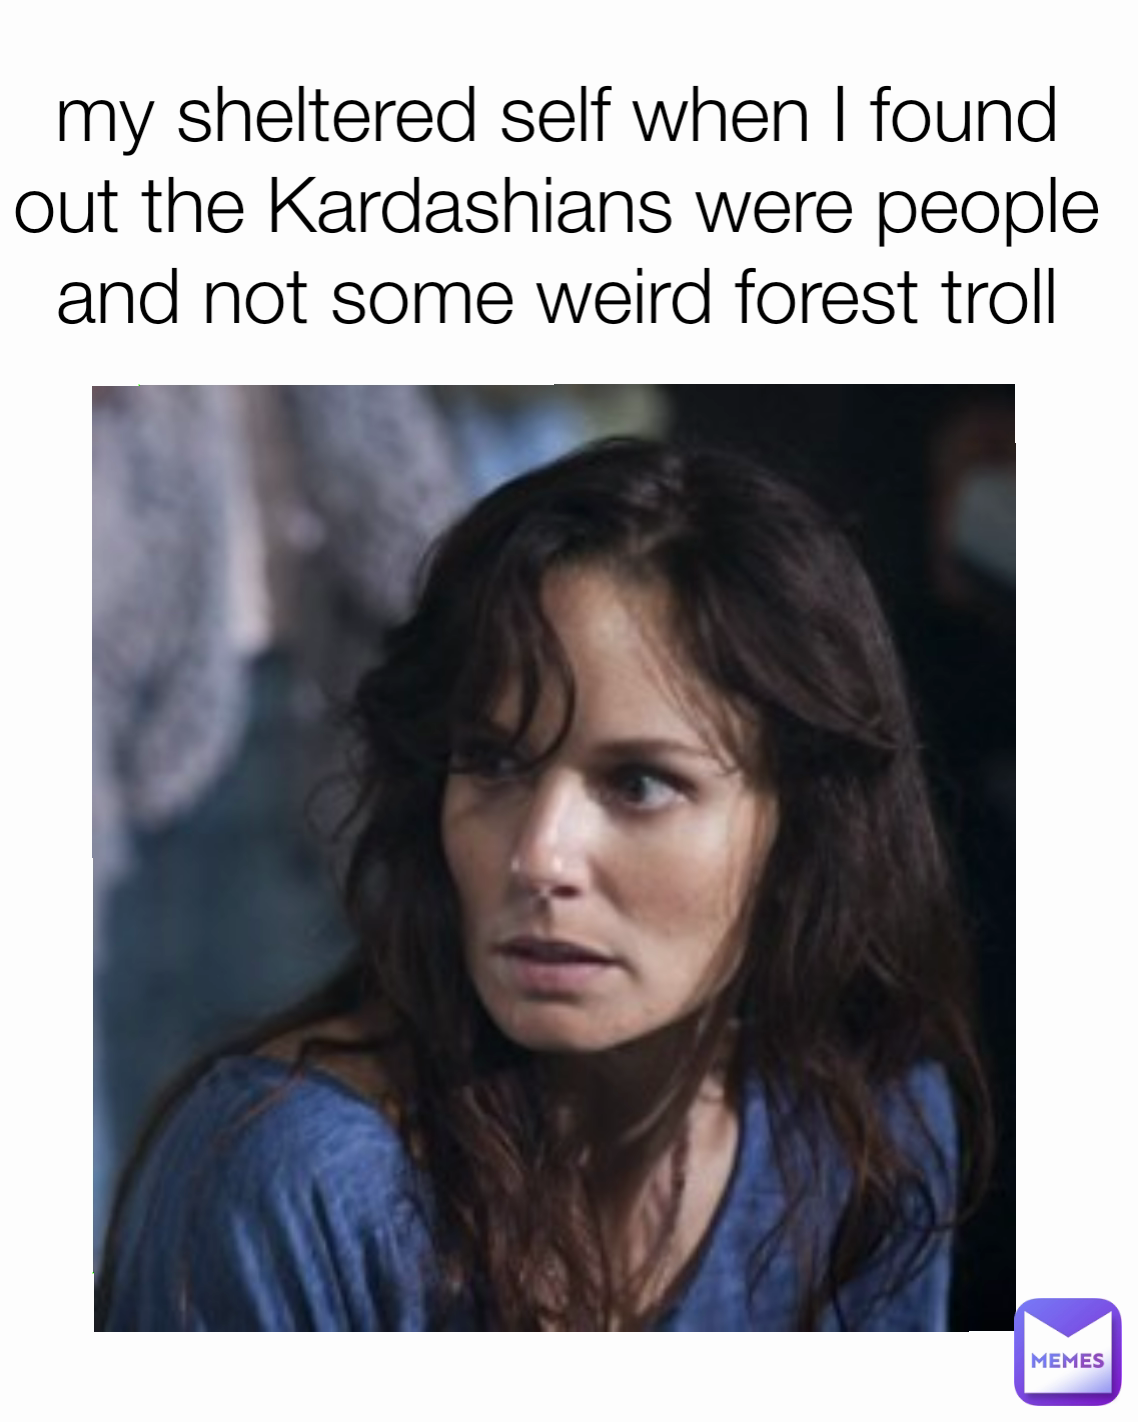 my sheltered self when I found out the Kardashians were people and not some weird forest troll